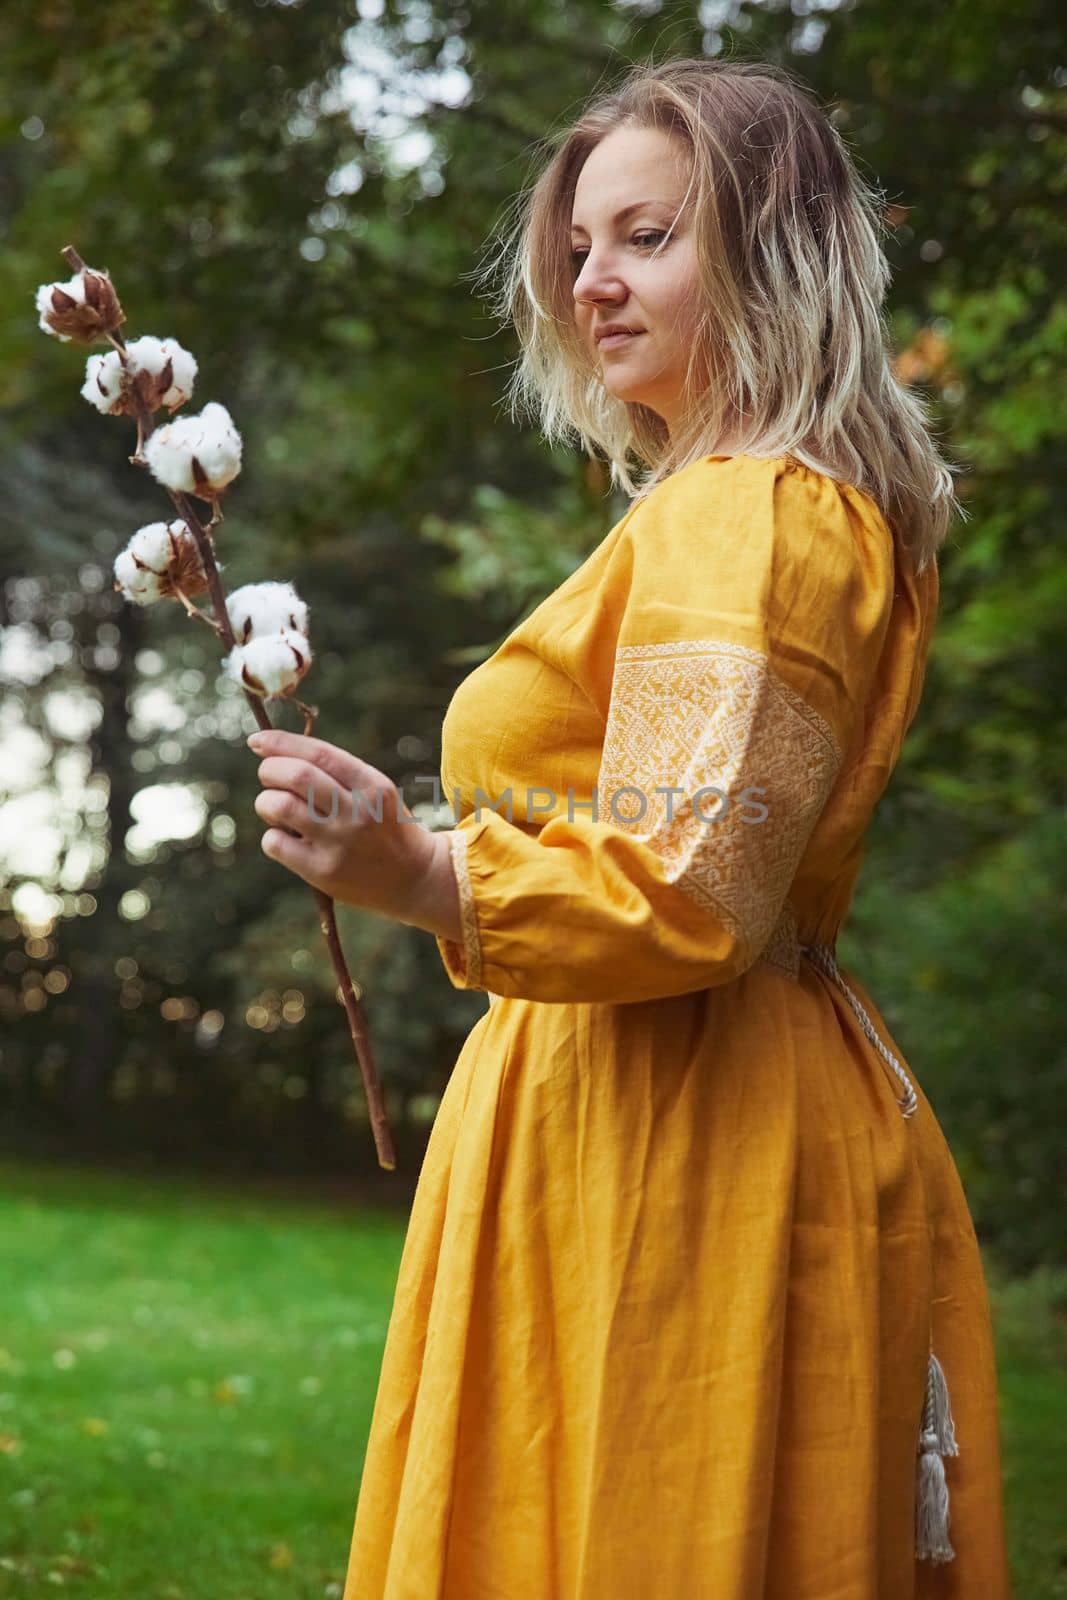 beautiful Ukrainian woman in an embroidered dress holds a sprig of cotton